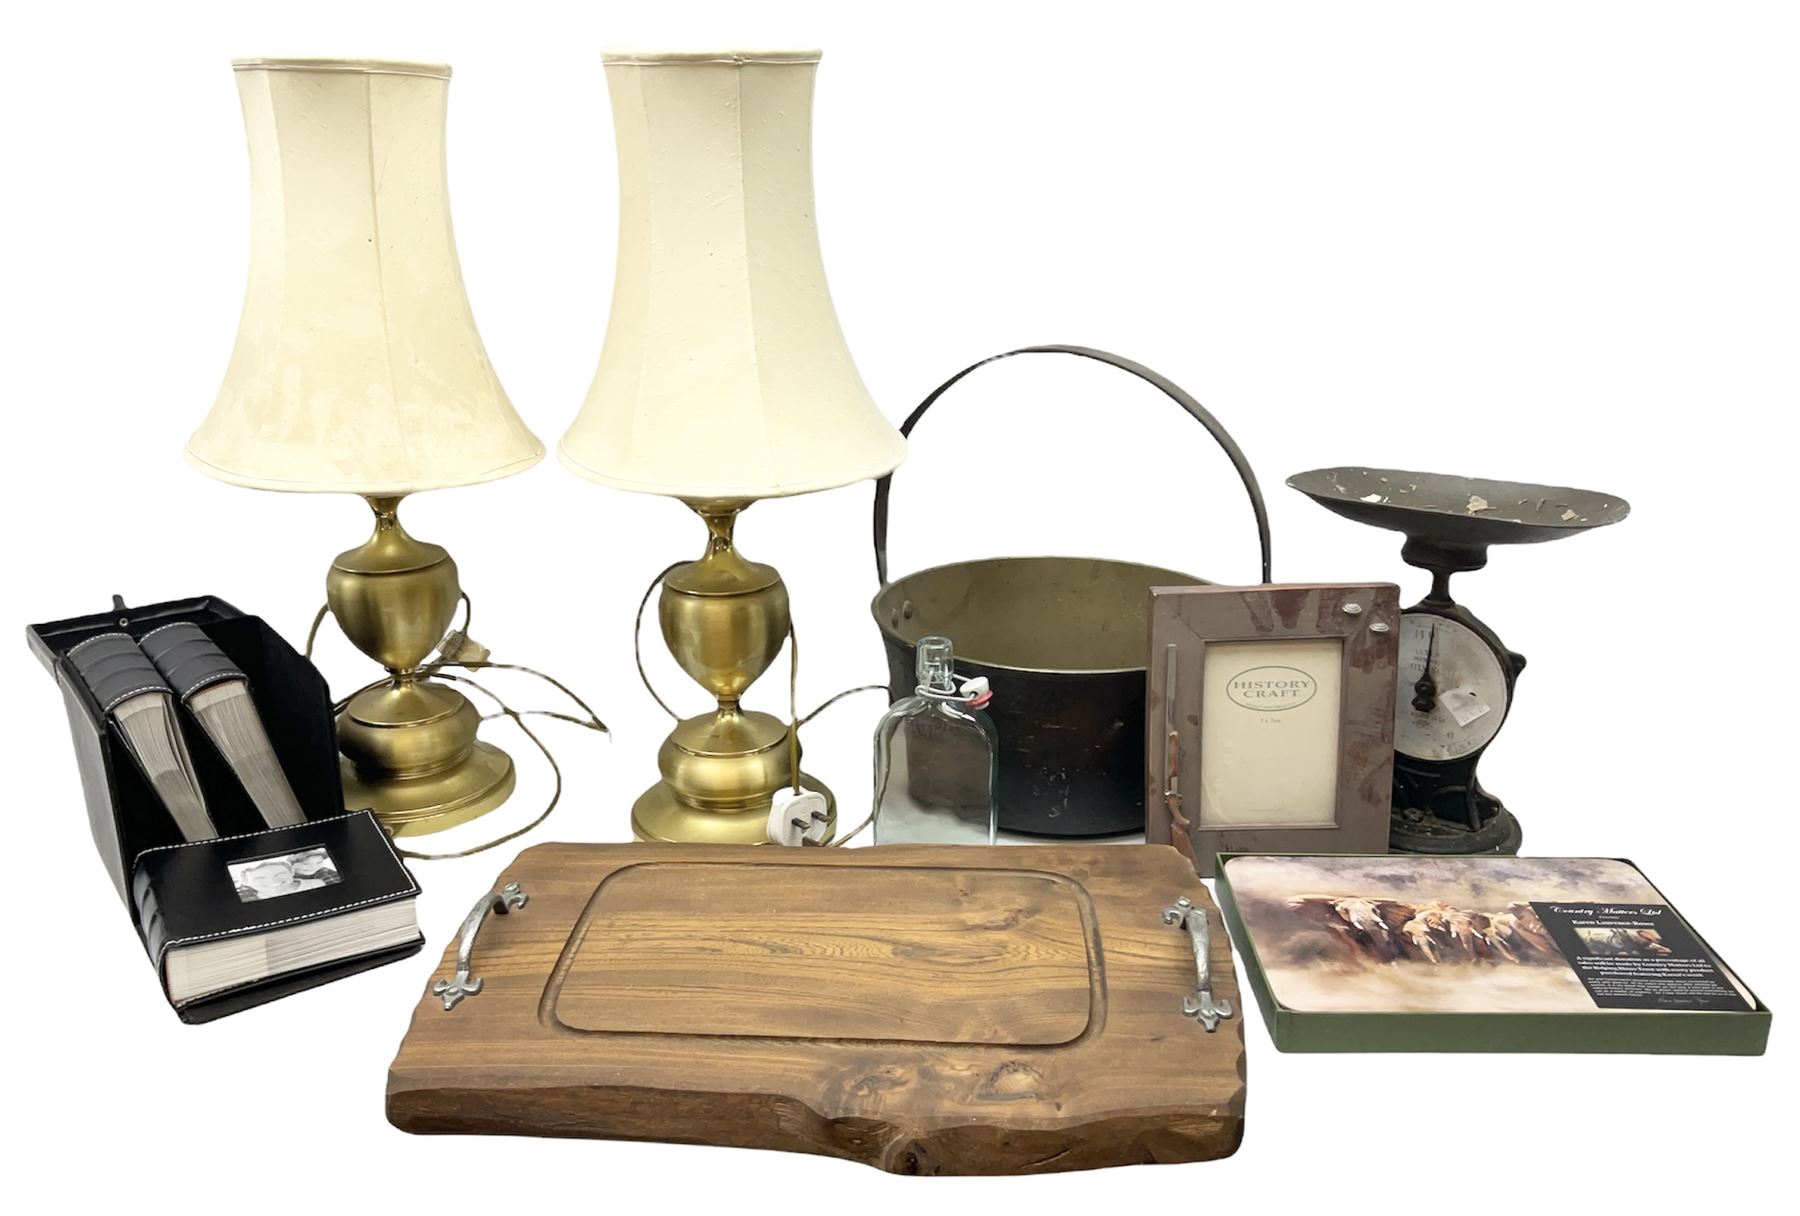 Two brassed table lamps with cream shades